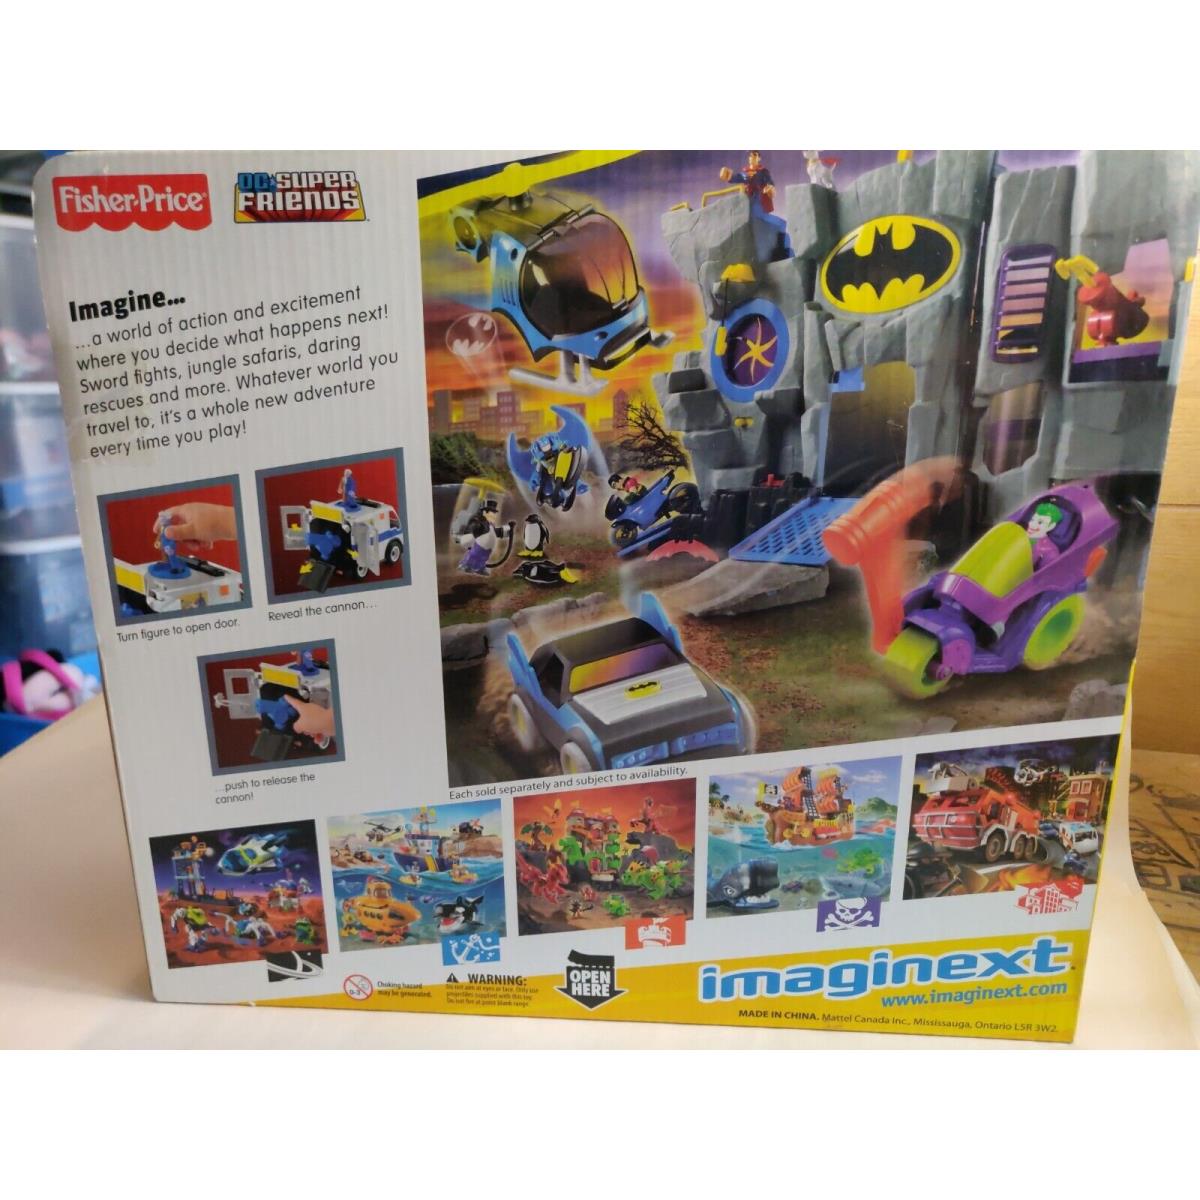 Imaginext Two-face The Riddler CosBman1182